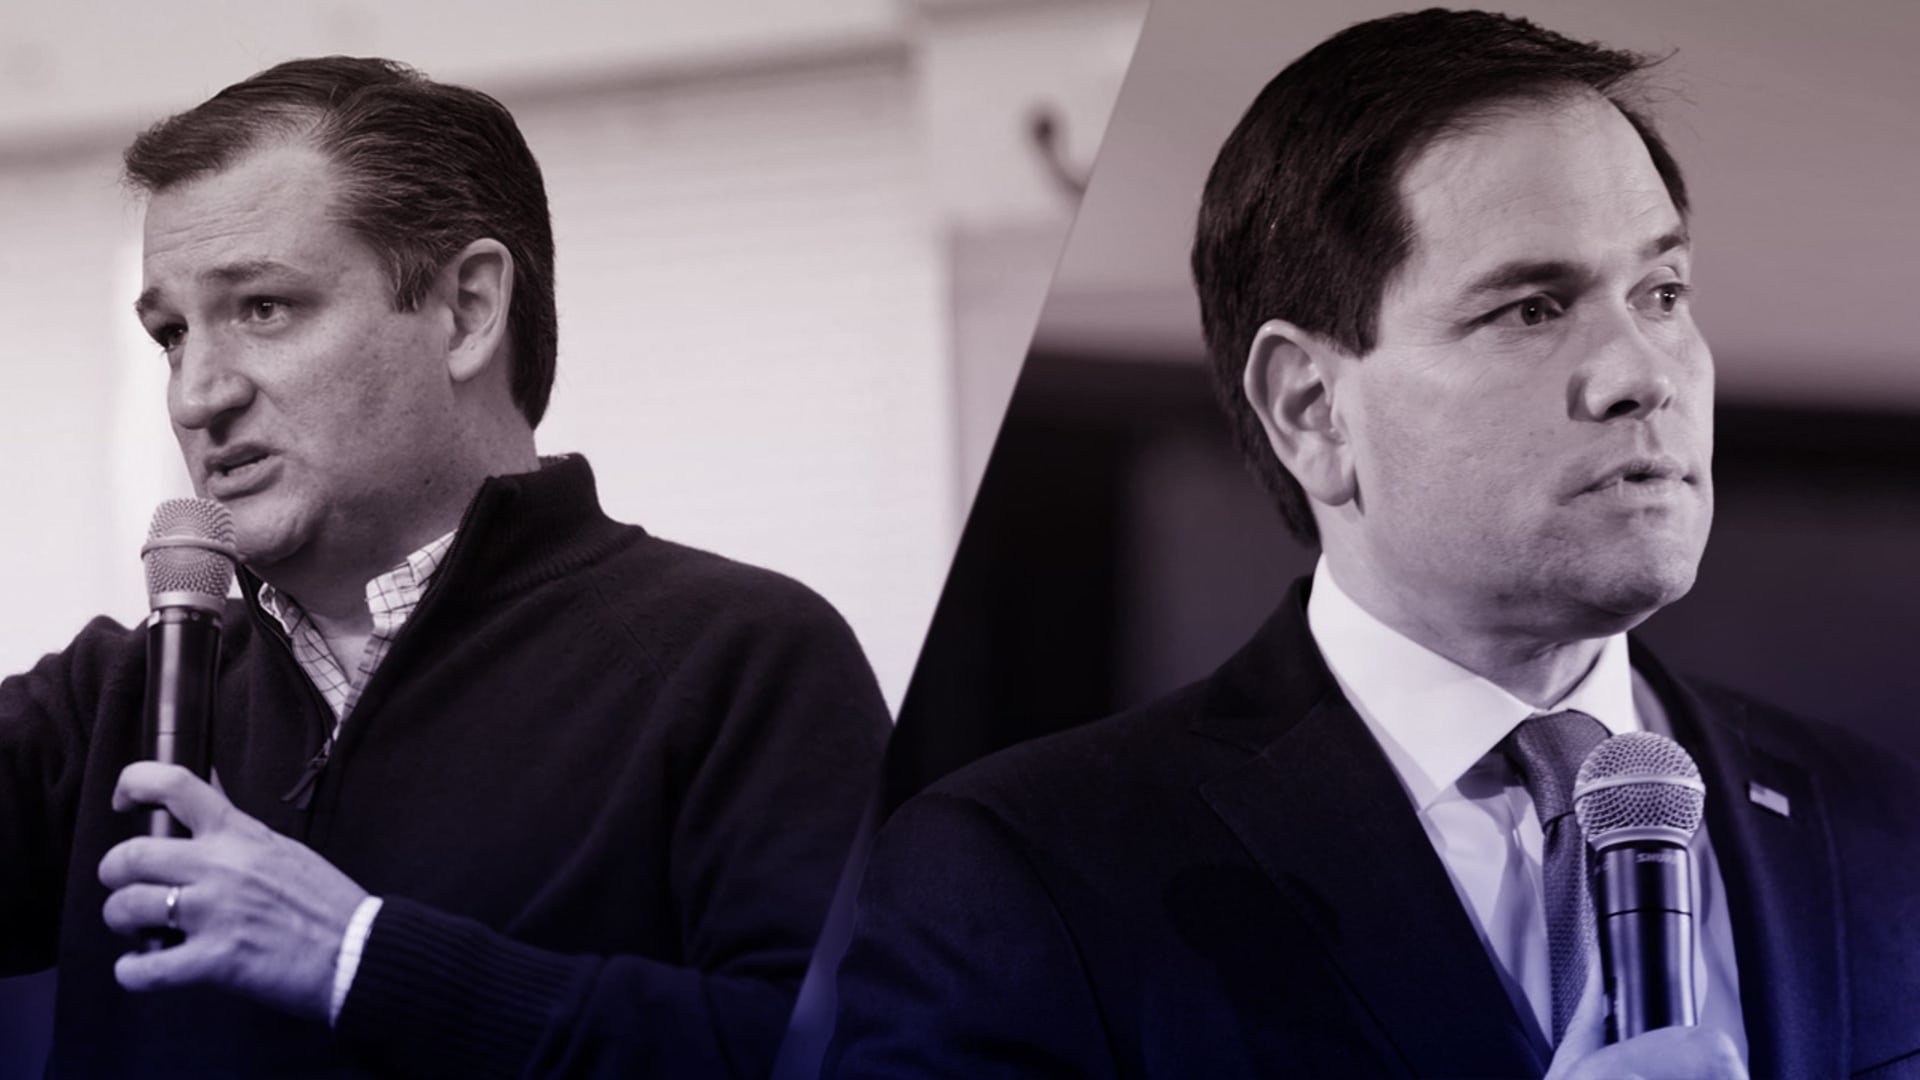 Cruz And Rubio Data Games May Not Be Enough To Overcome Trump’s Lead